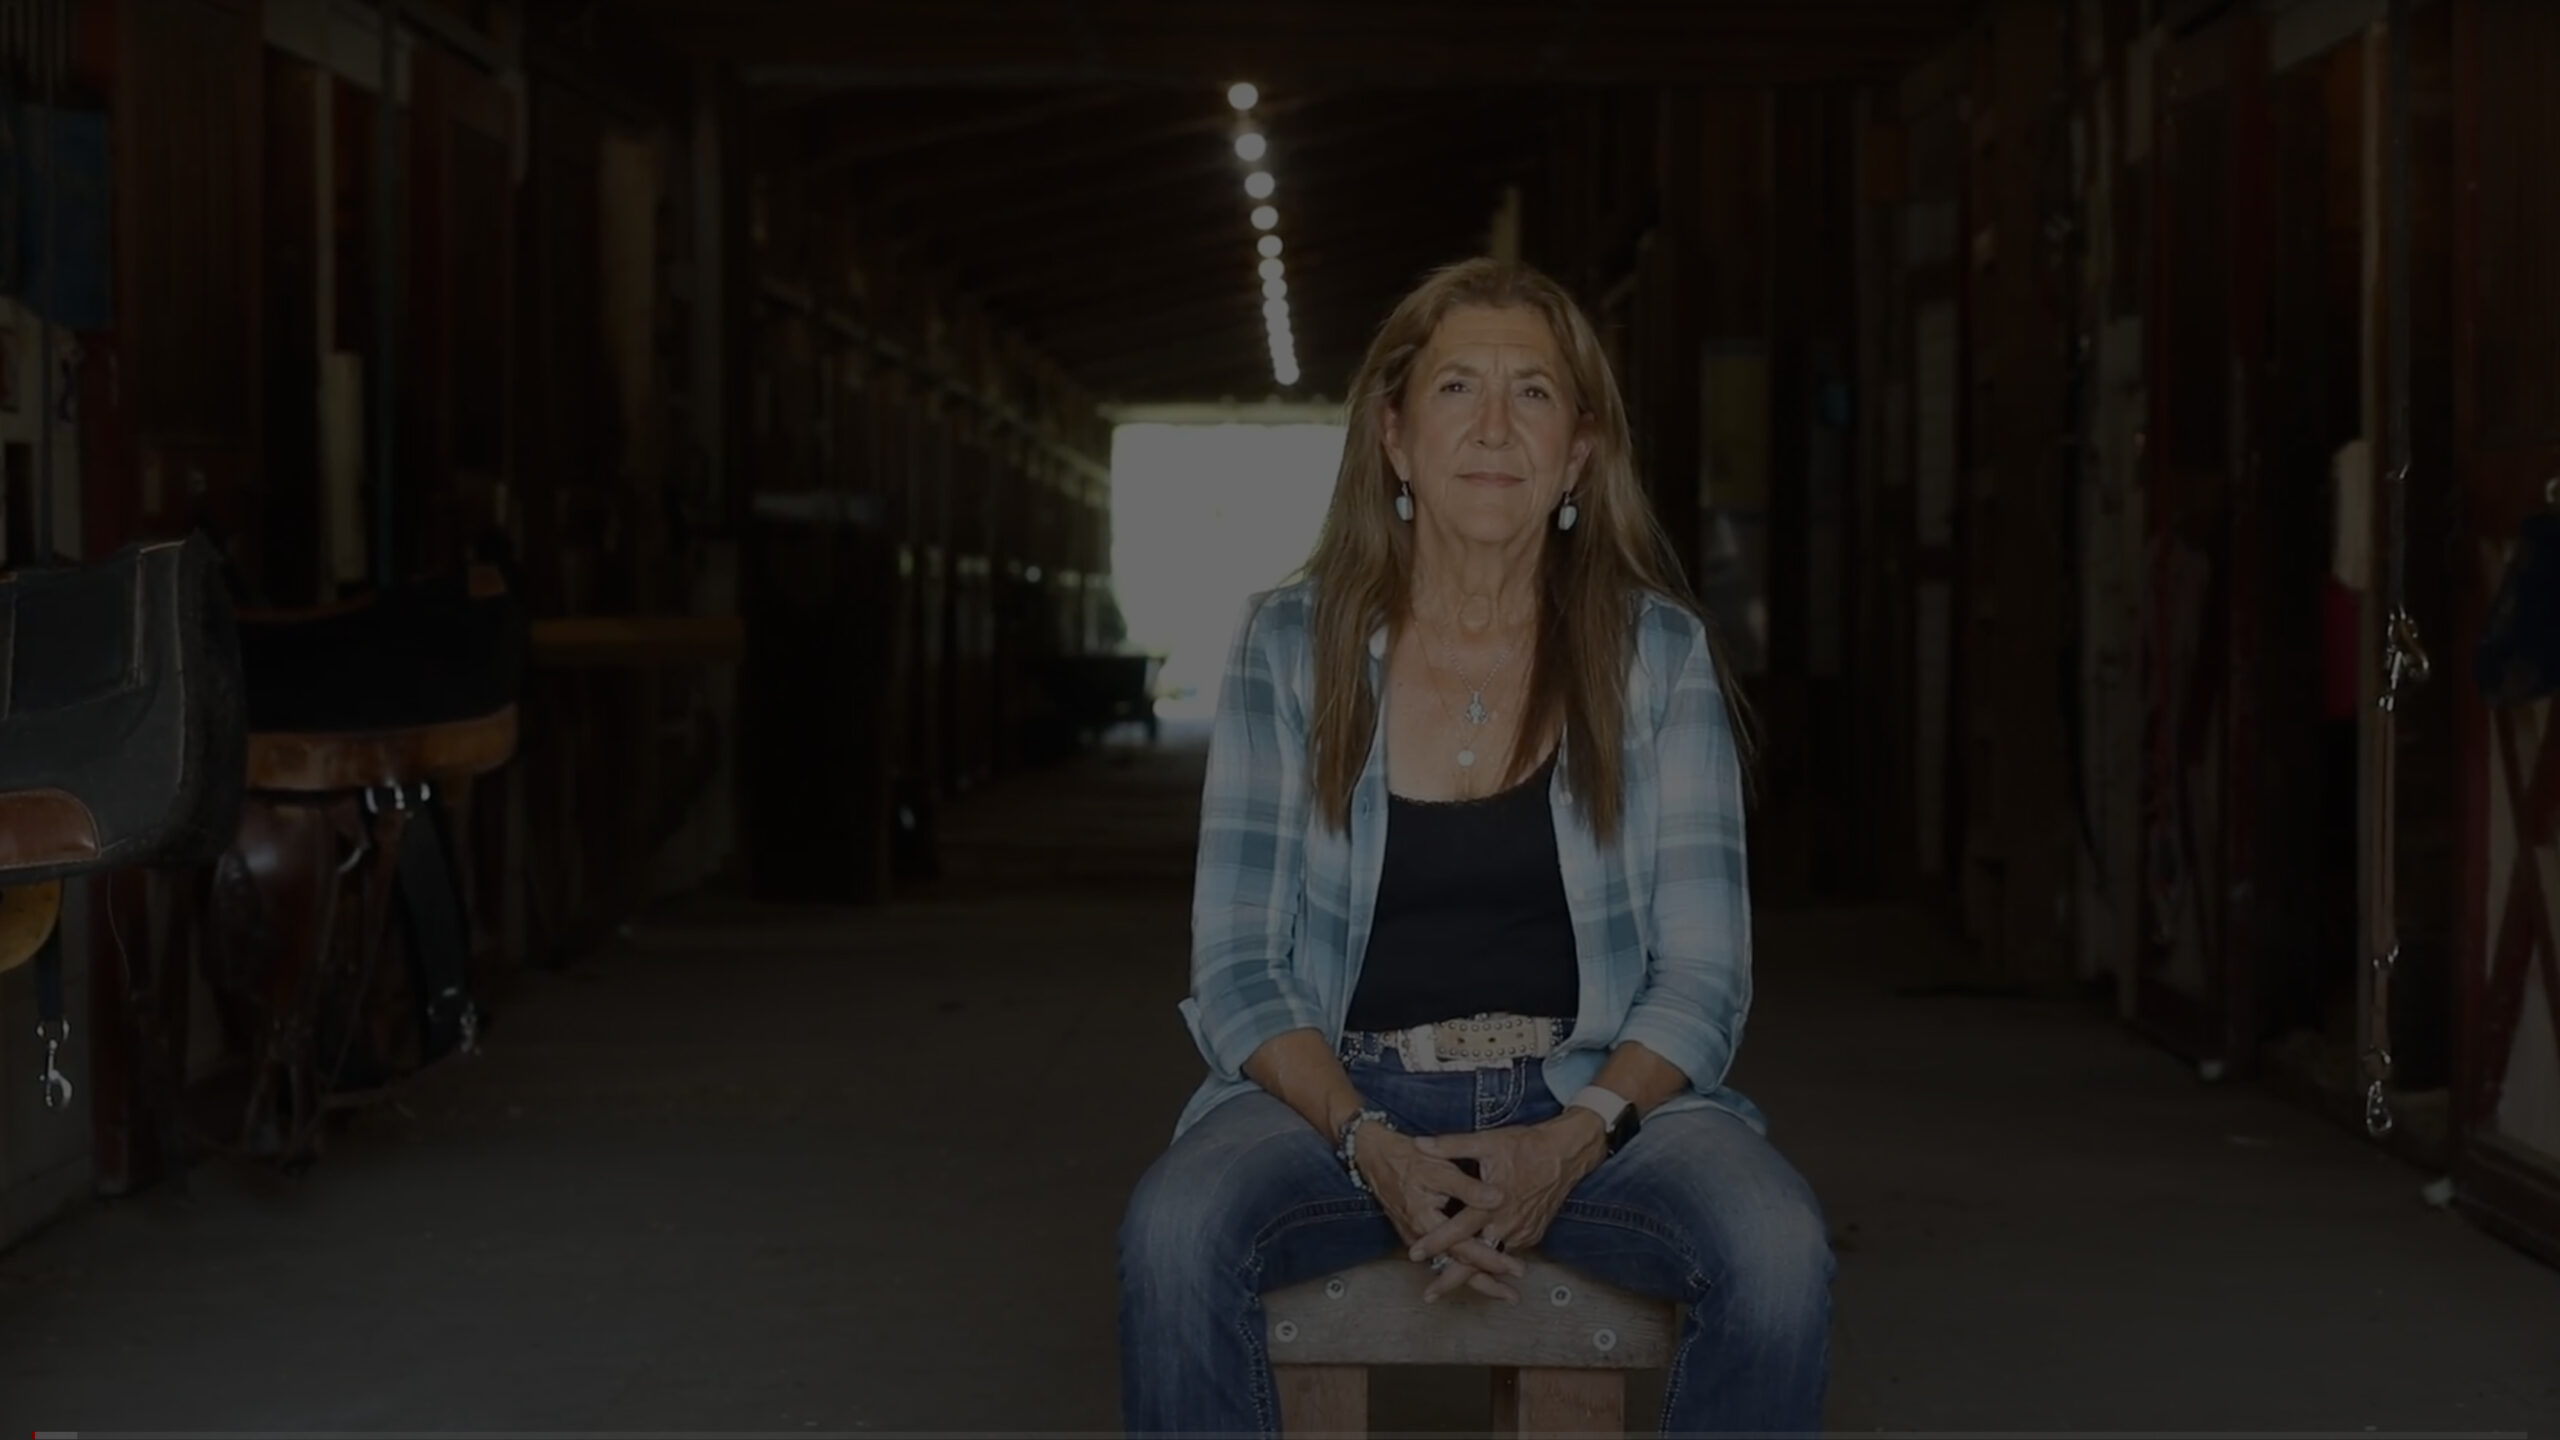 Owner Lynn sitting on stool in horse stables.